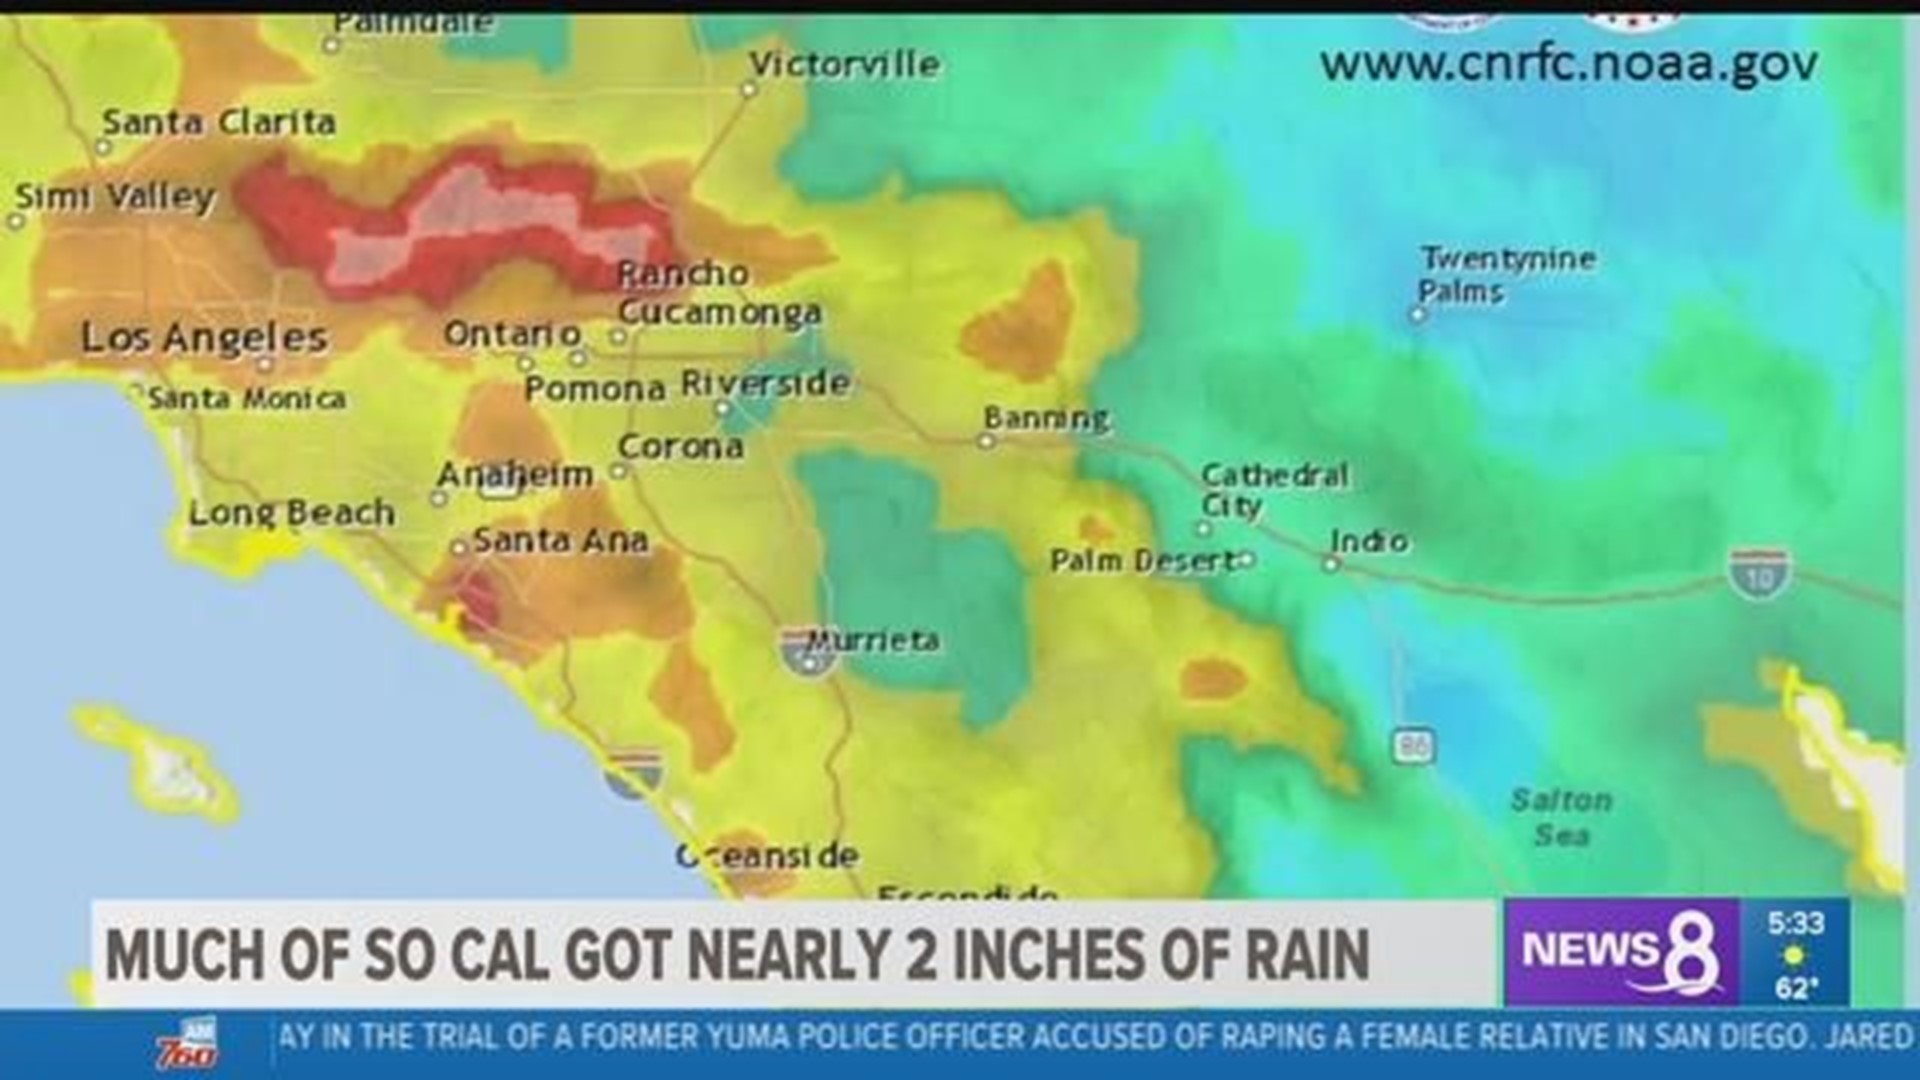 San Diego received more rain in three months than all of last year